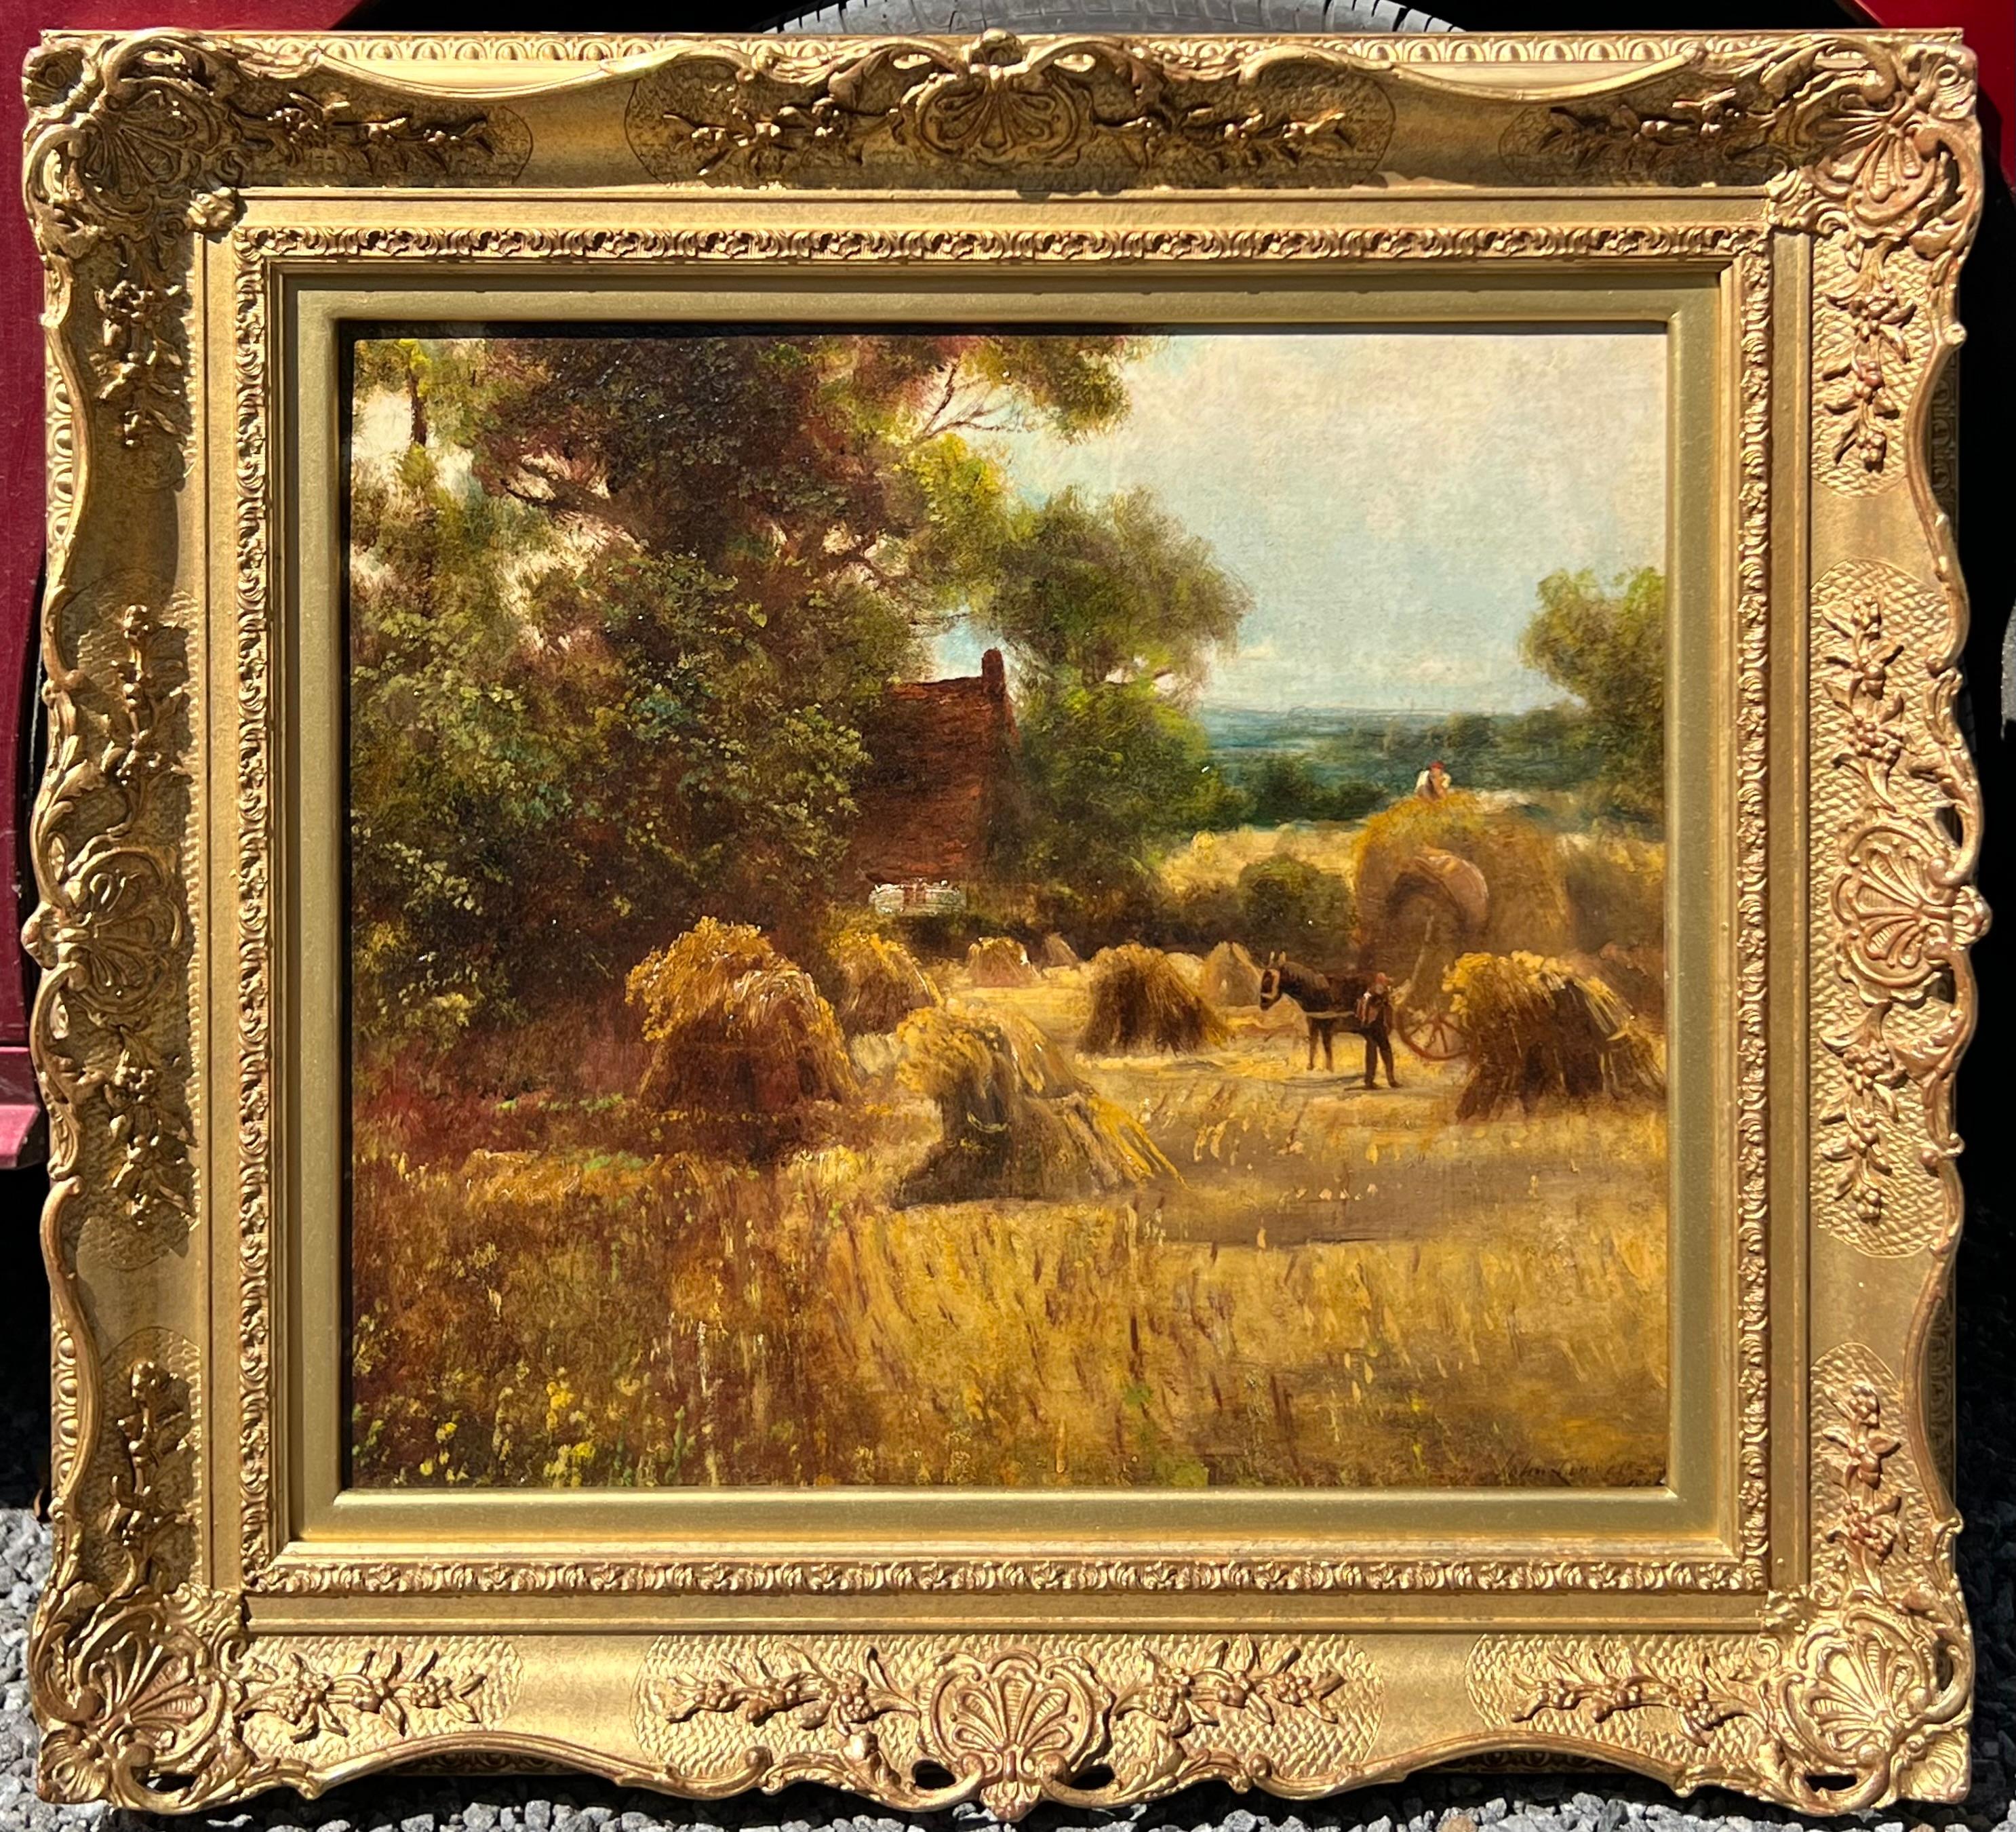 Fall farm scene painting by John Linnell, oil on board signed and dated in the lower right. The painting measures 26.5